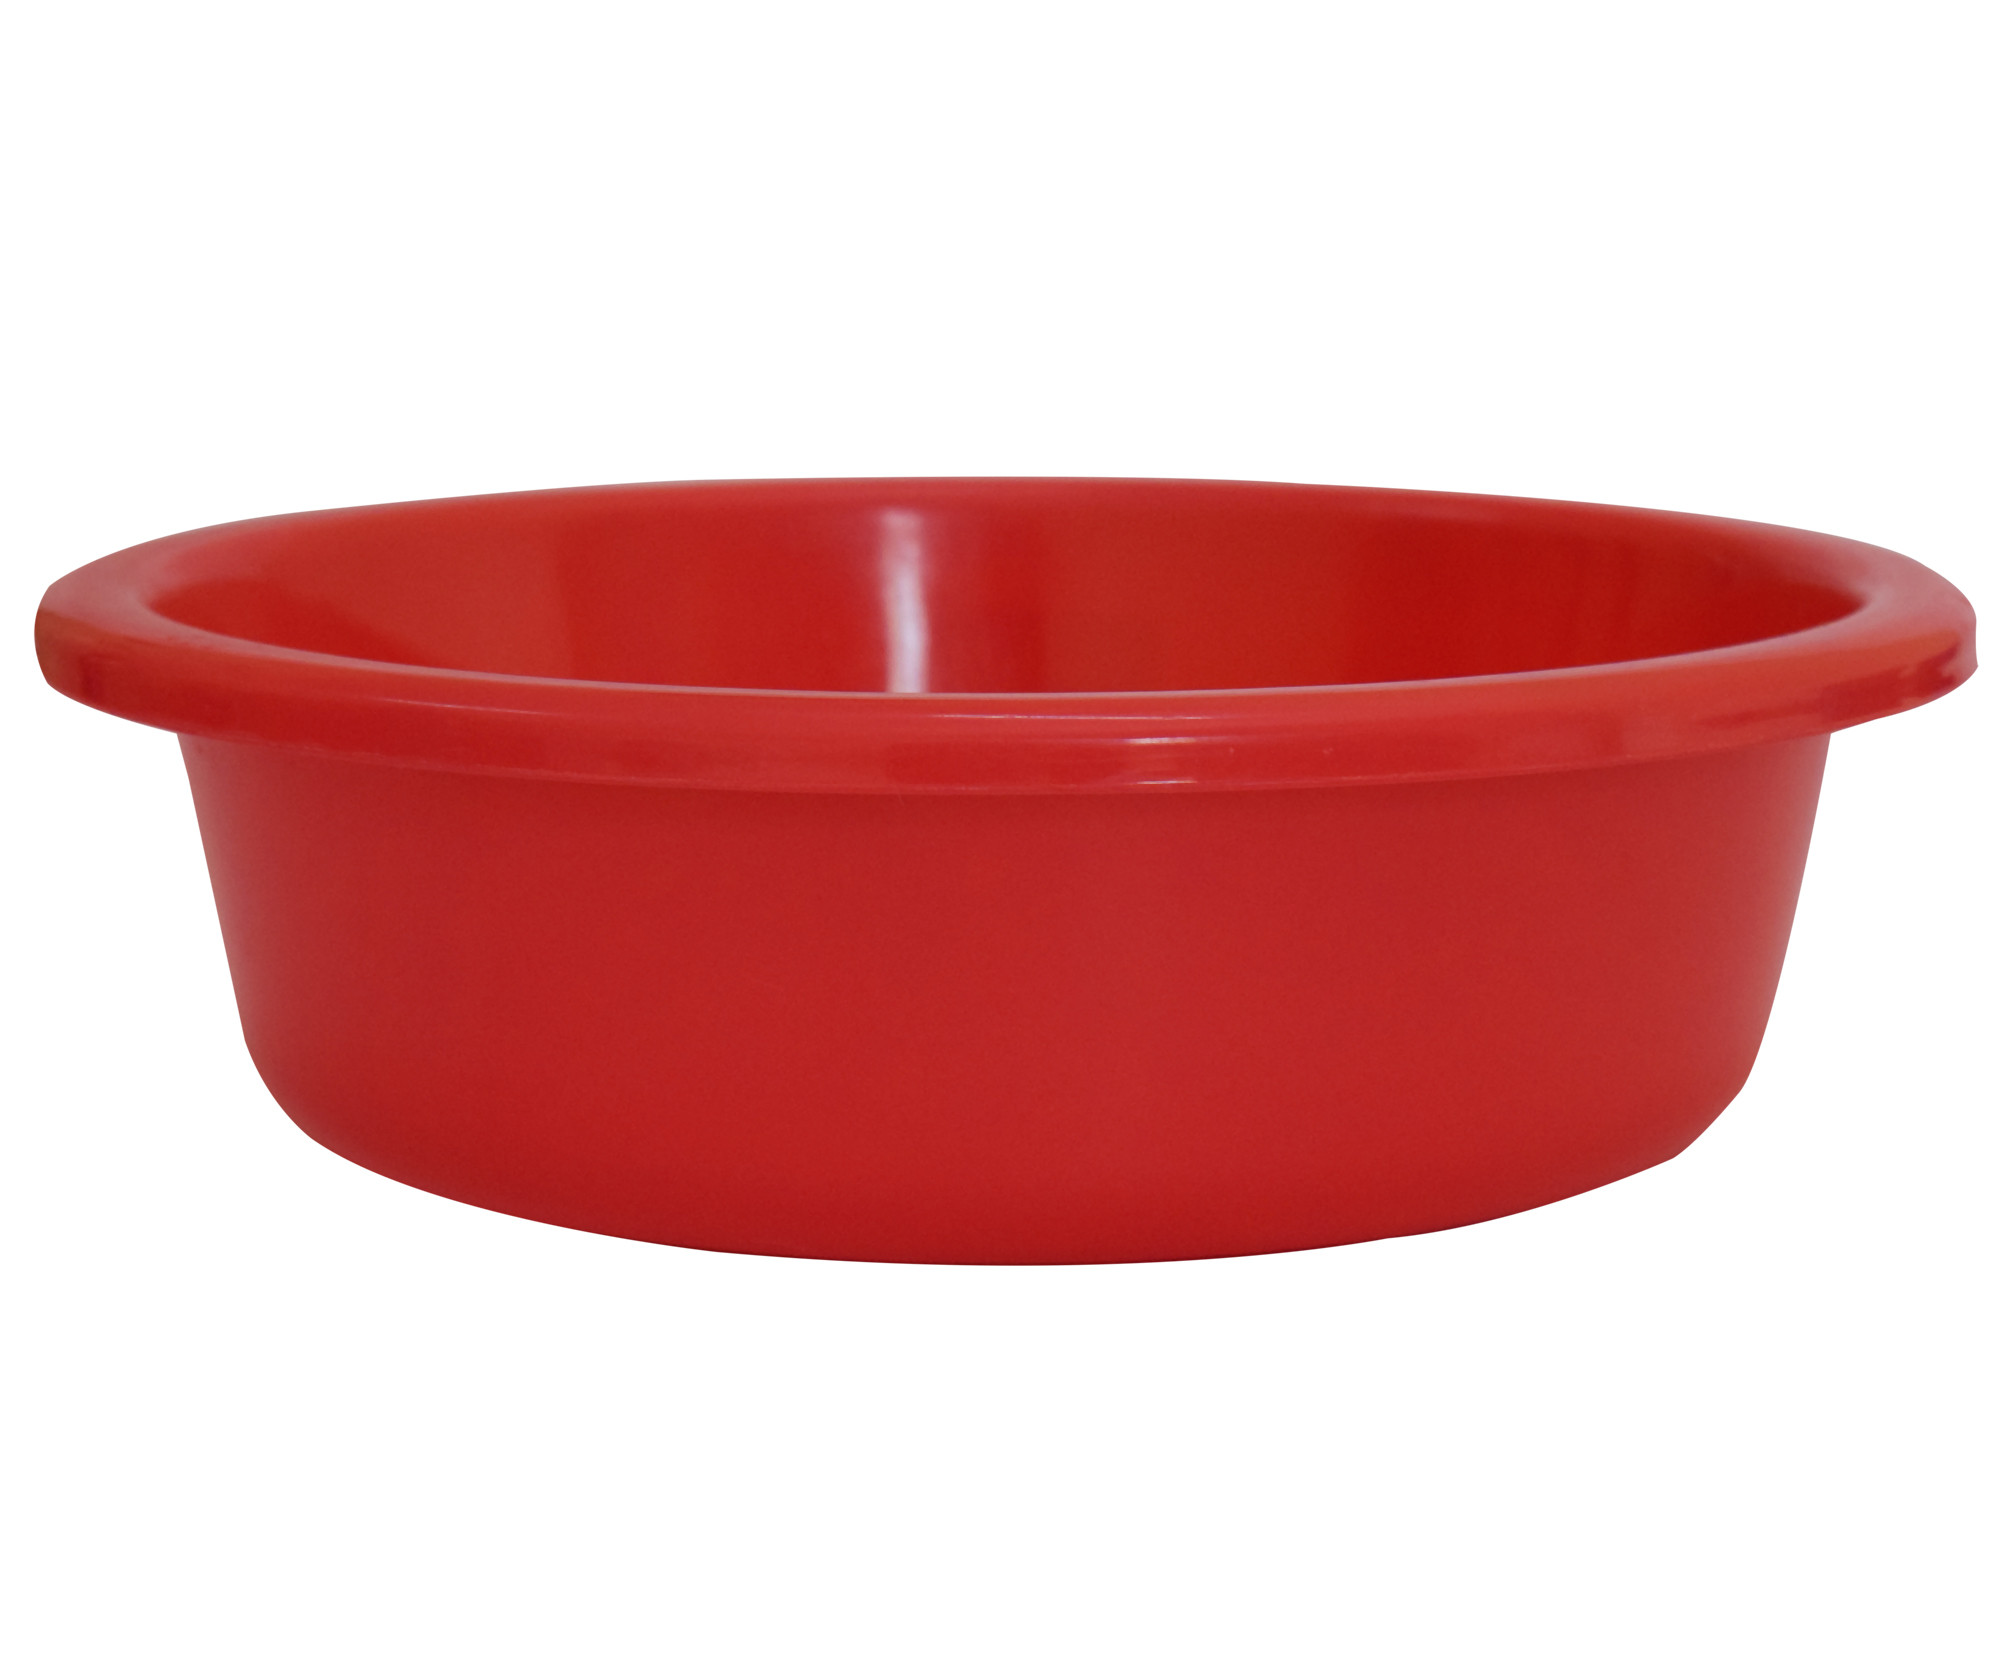 Kuber Industries Multiuses Unbreakable Plastic Knead Dough Basket/Basin Bowl For Home & Kitchen 6 Ltr- Pack of 2 (Red & Pink)